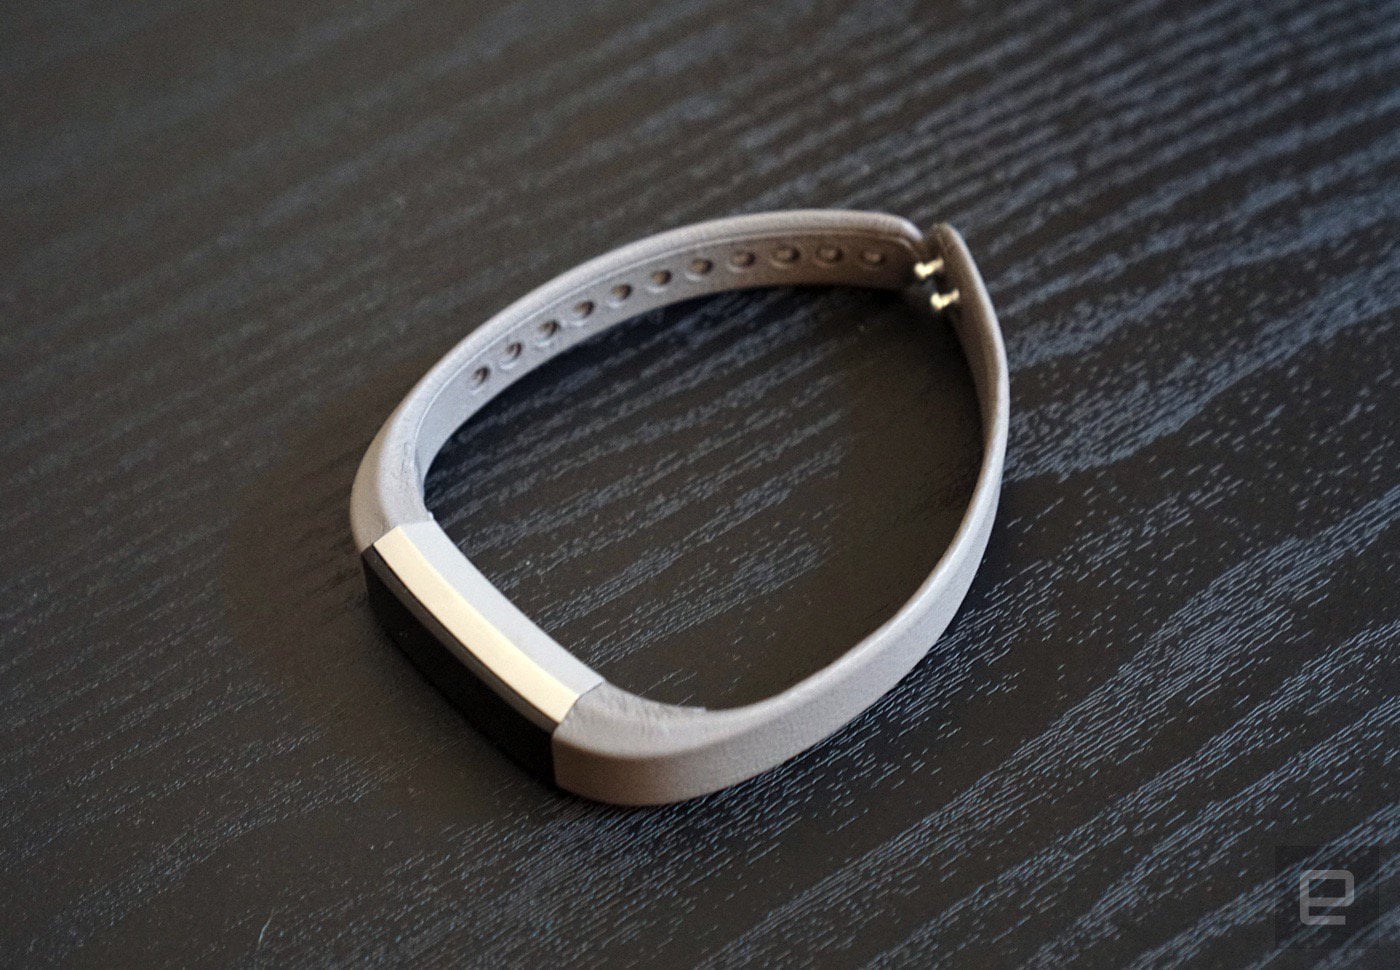 With Alta, Fitbit sooner or later made a fashionable health band